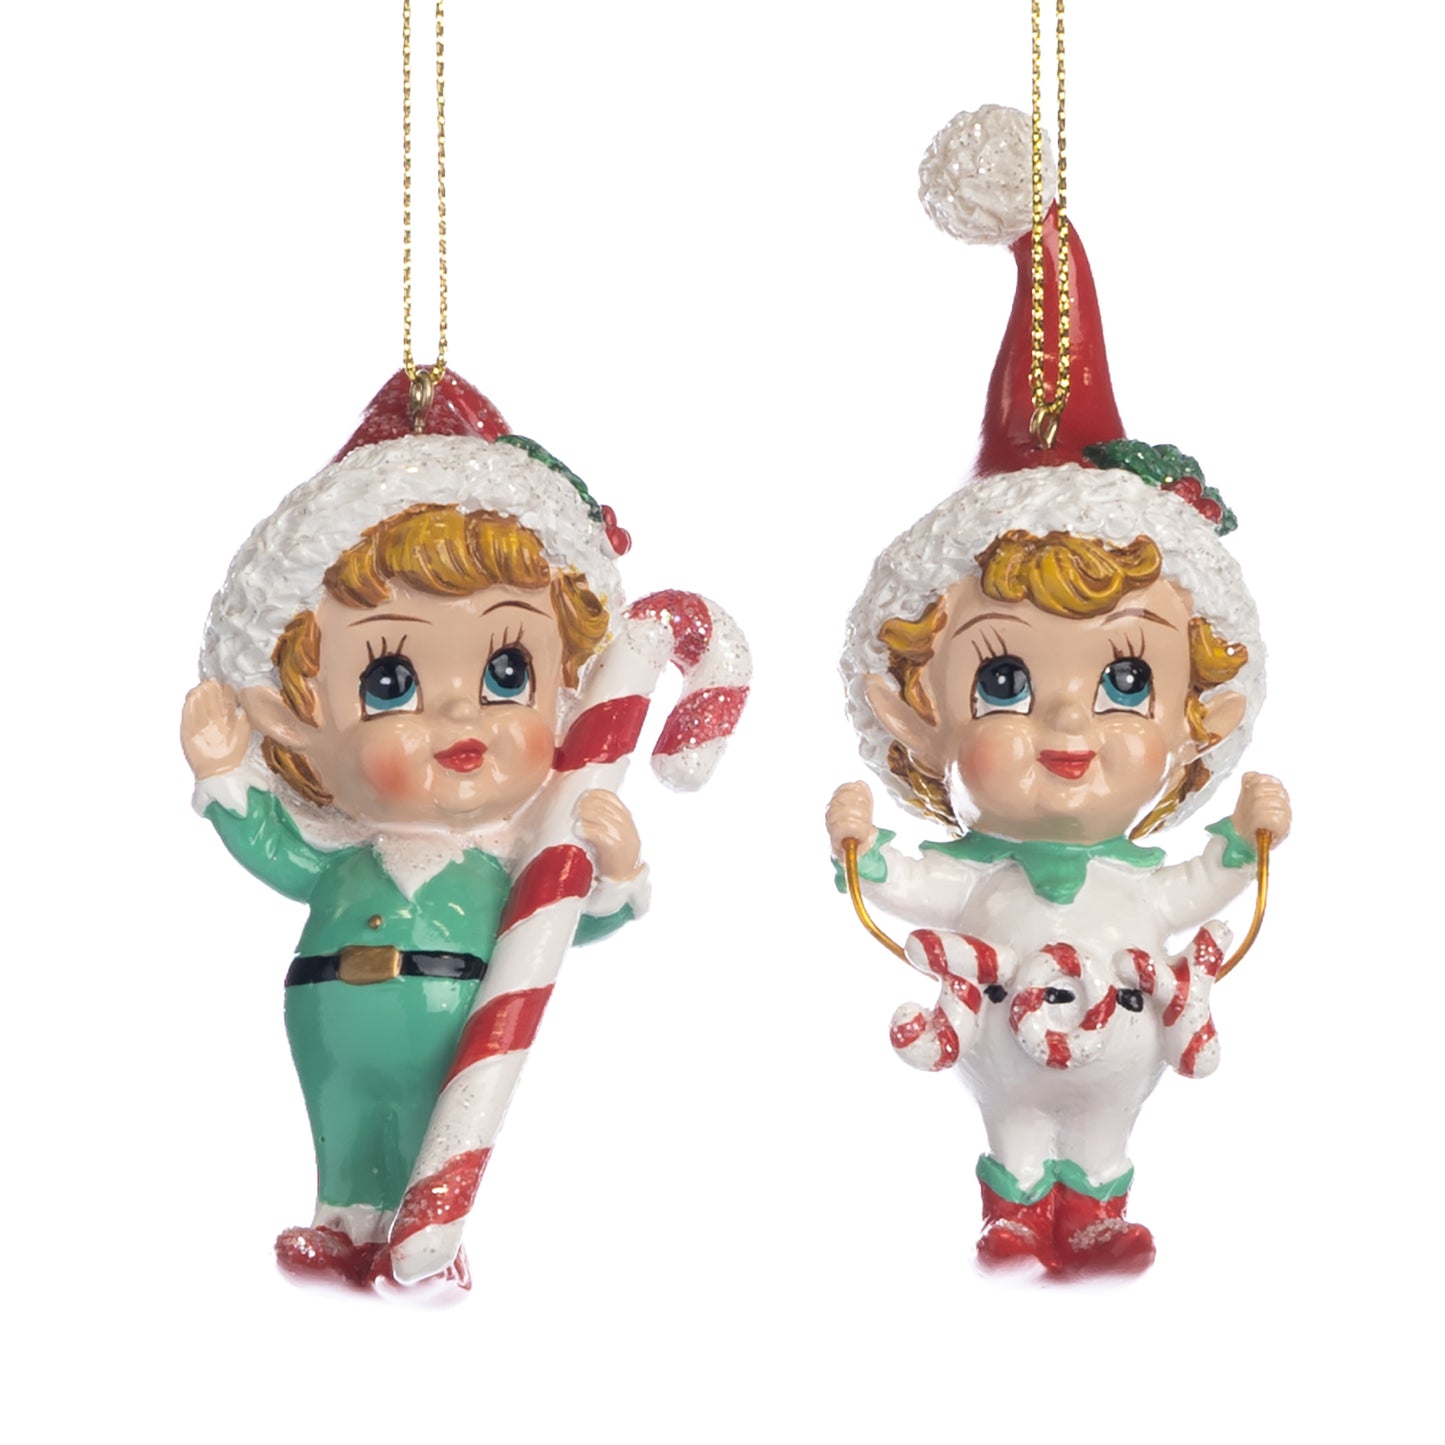 Little Elf with Sweets 10cm - 2 Assortments